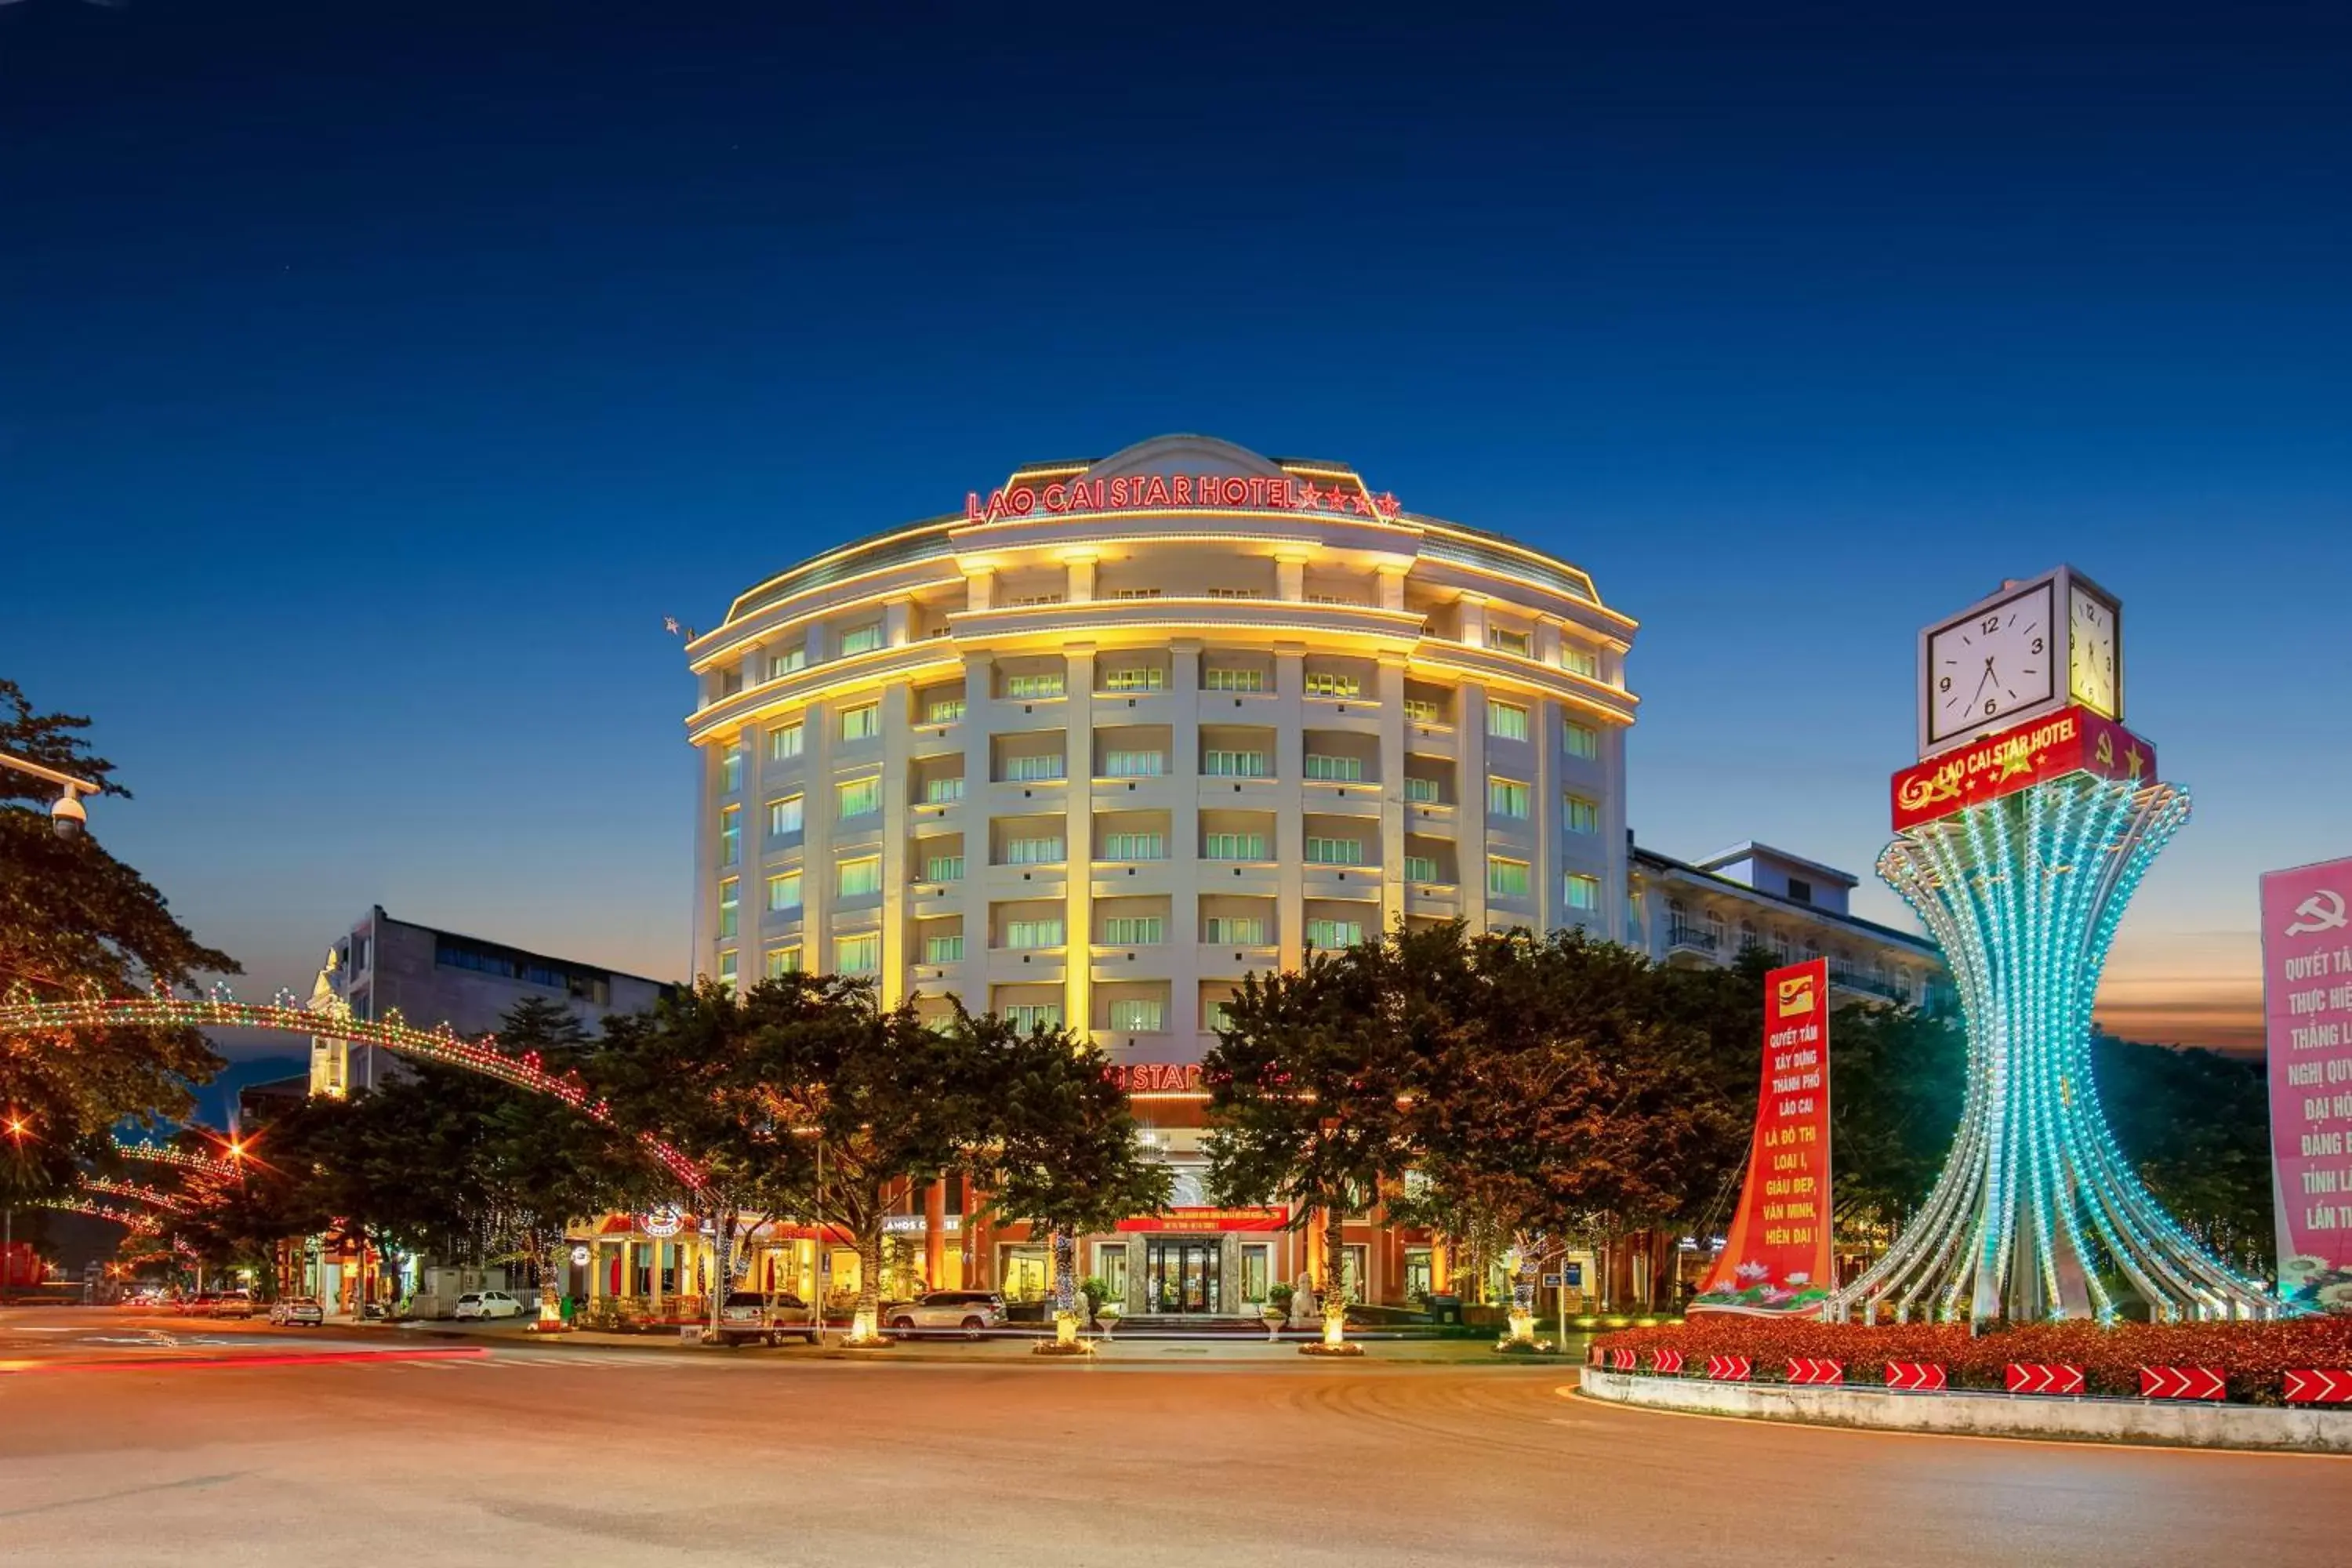 Property Building in Lao Cai Star Hotel